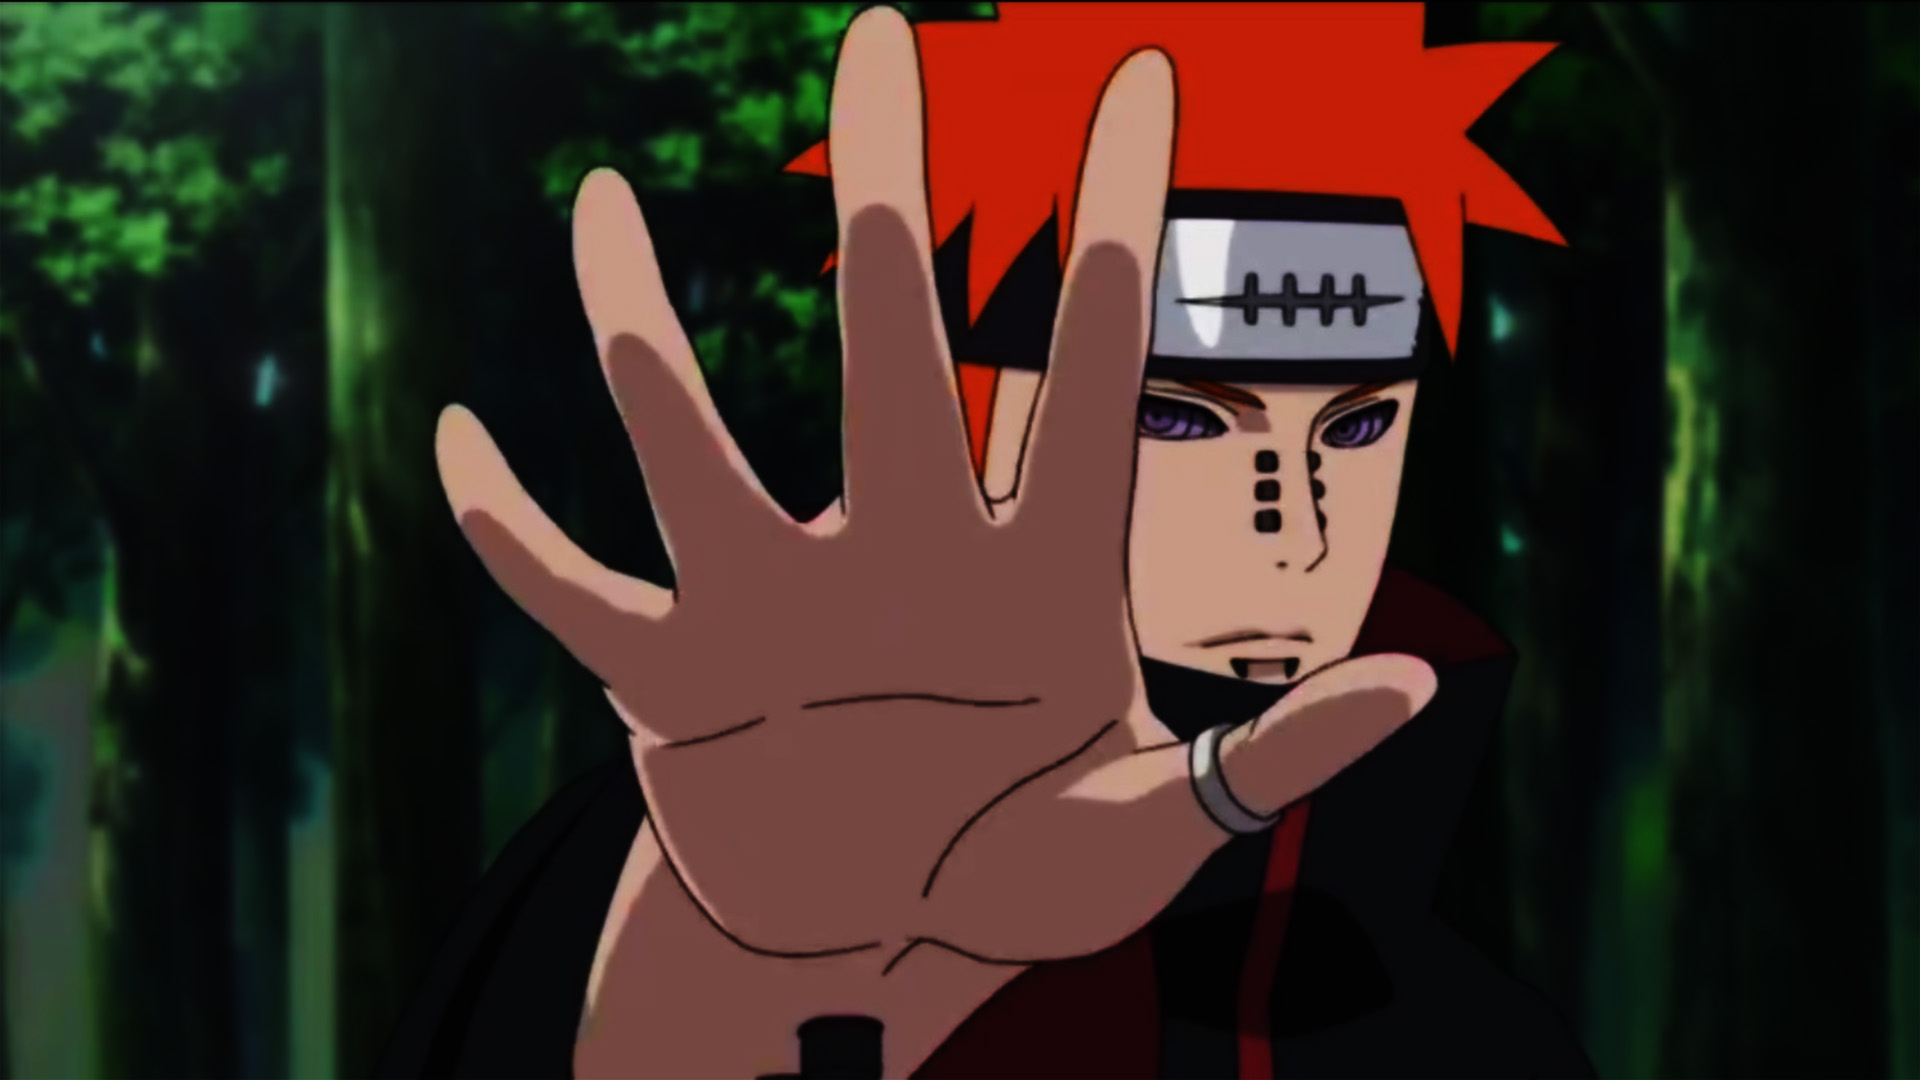 Download latest Naruto HD Wallpapers | HD Wallpapers - Latest HD ...